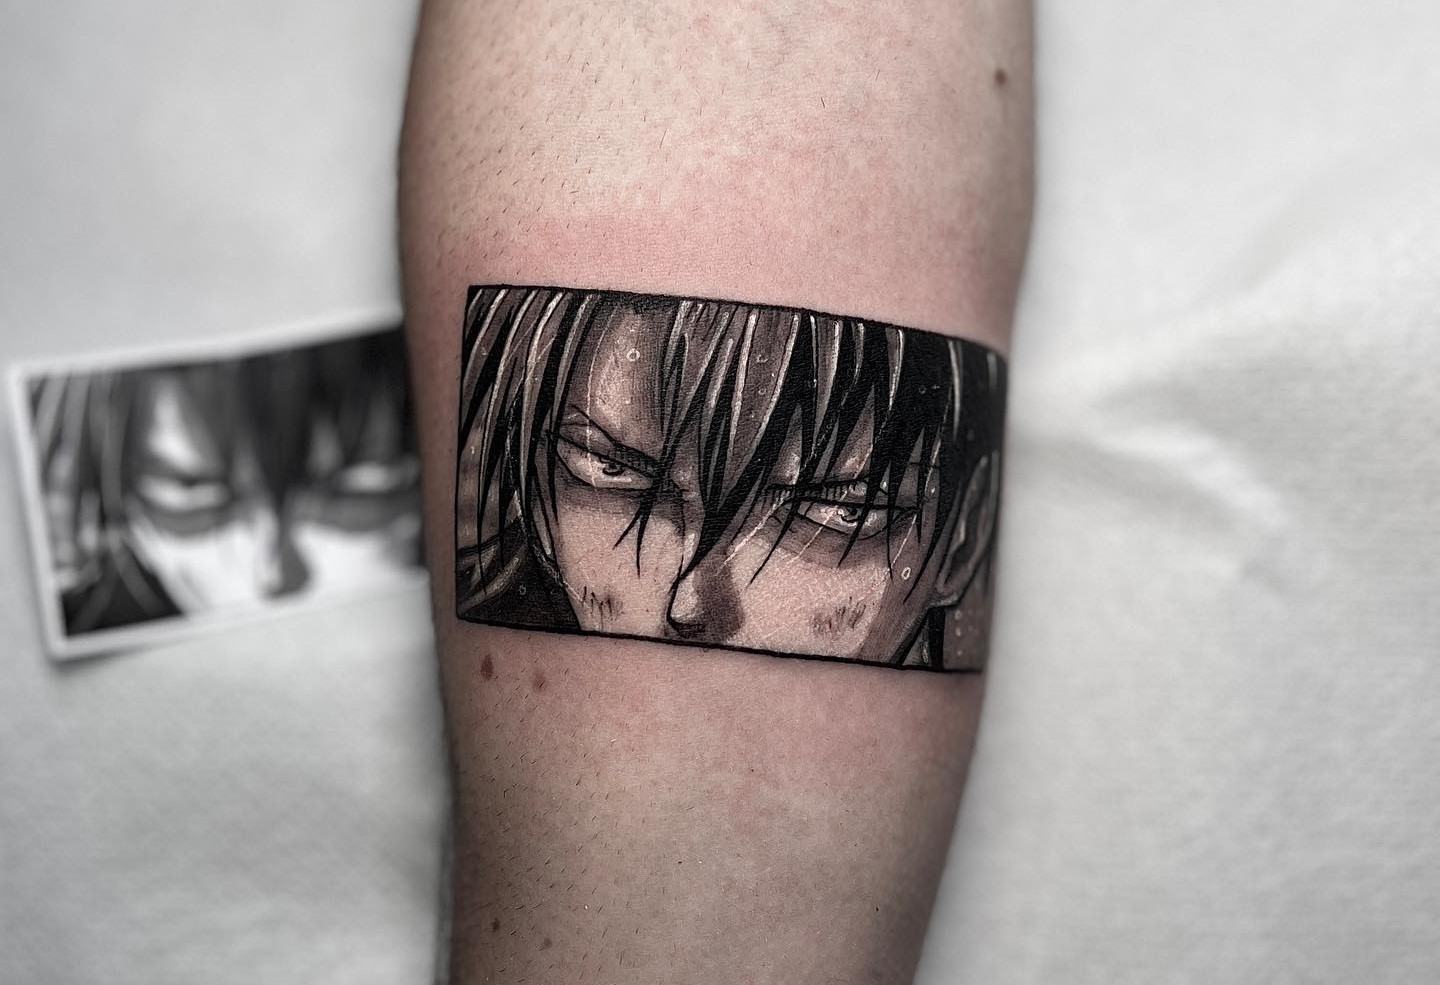 101 Attack on Titan Tattoo Ideas With Sublime Levels of Energy